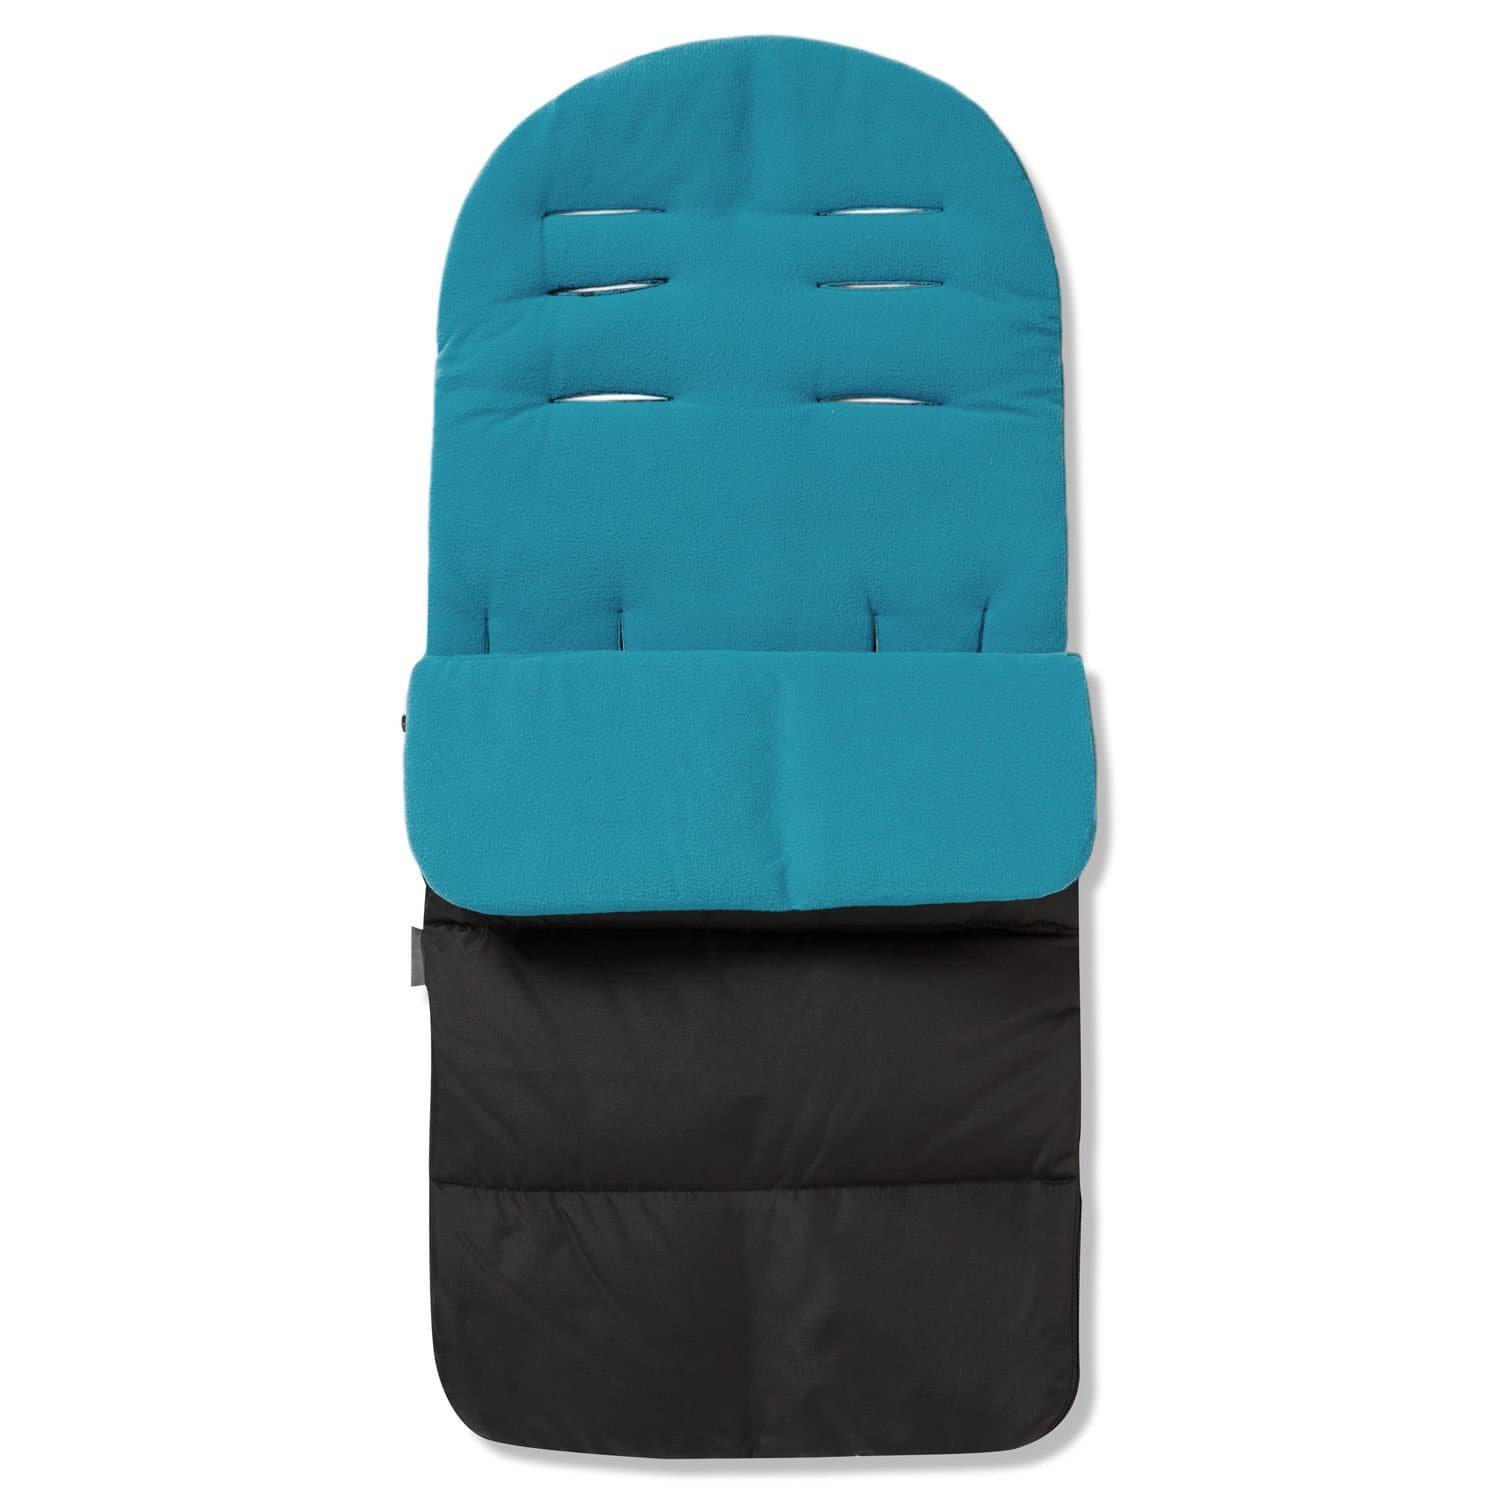 Premium Footmuff / Cosy Toes Compatible with My Child - Ocean Blue / Fits All Models | For Your Little One